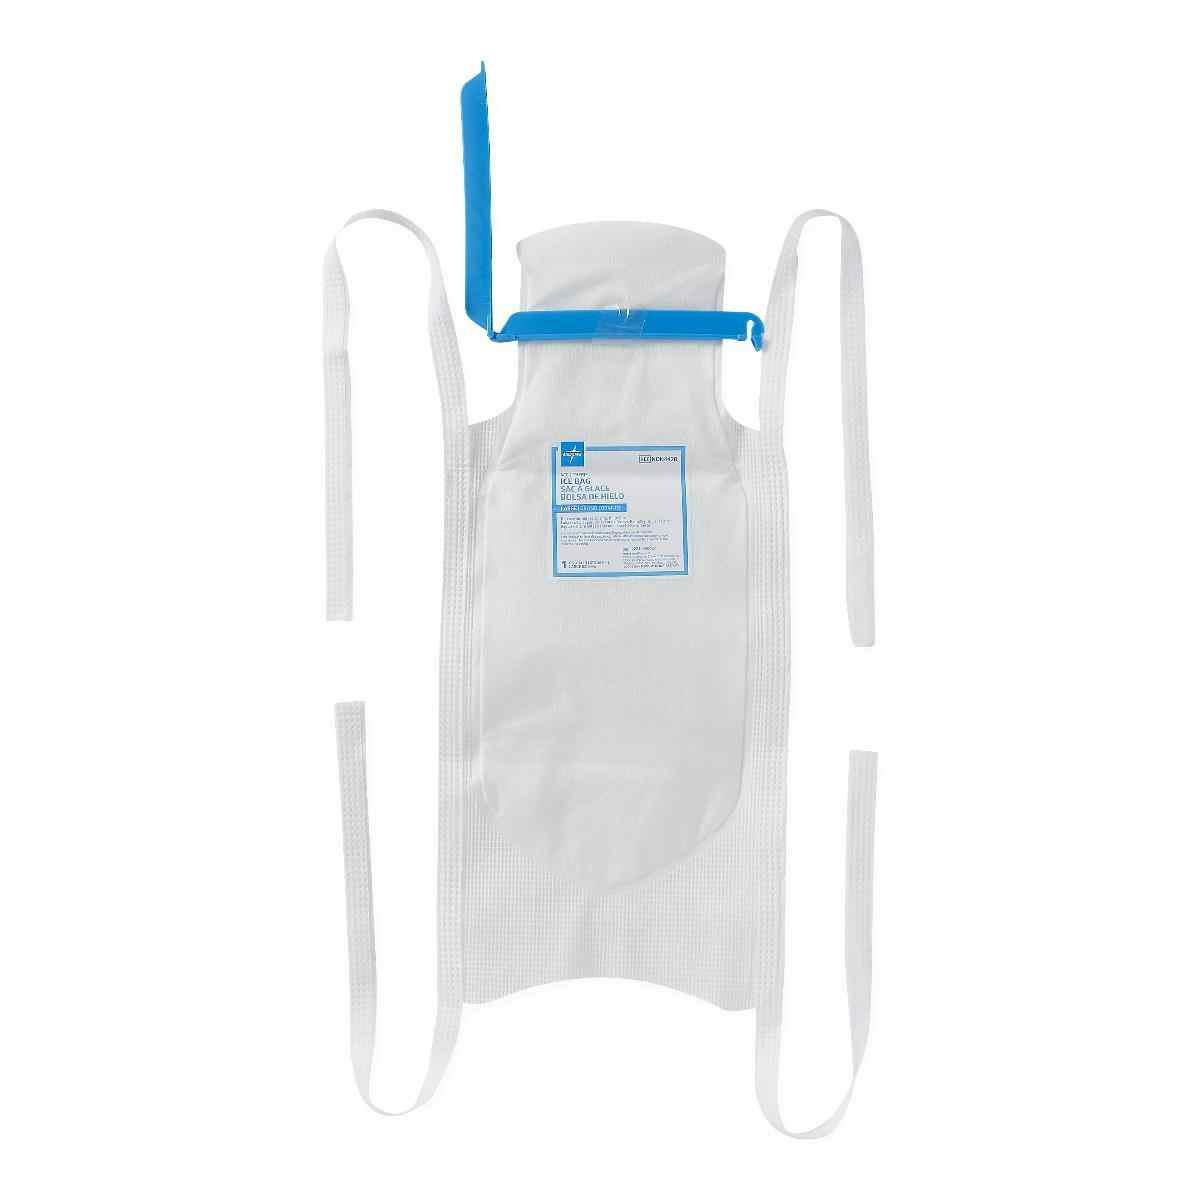 Medline Accu-Therm Refillable Ice Bags, Clamp Closure, NON4420, 6 1/2" X 14" - Case of 50